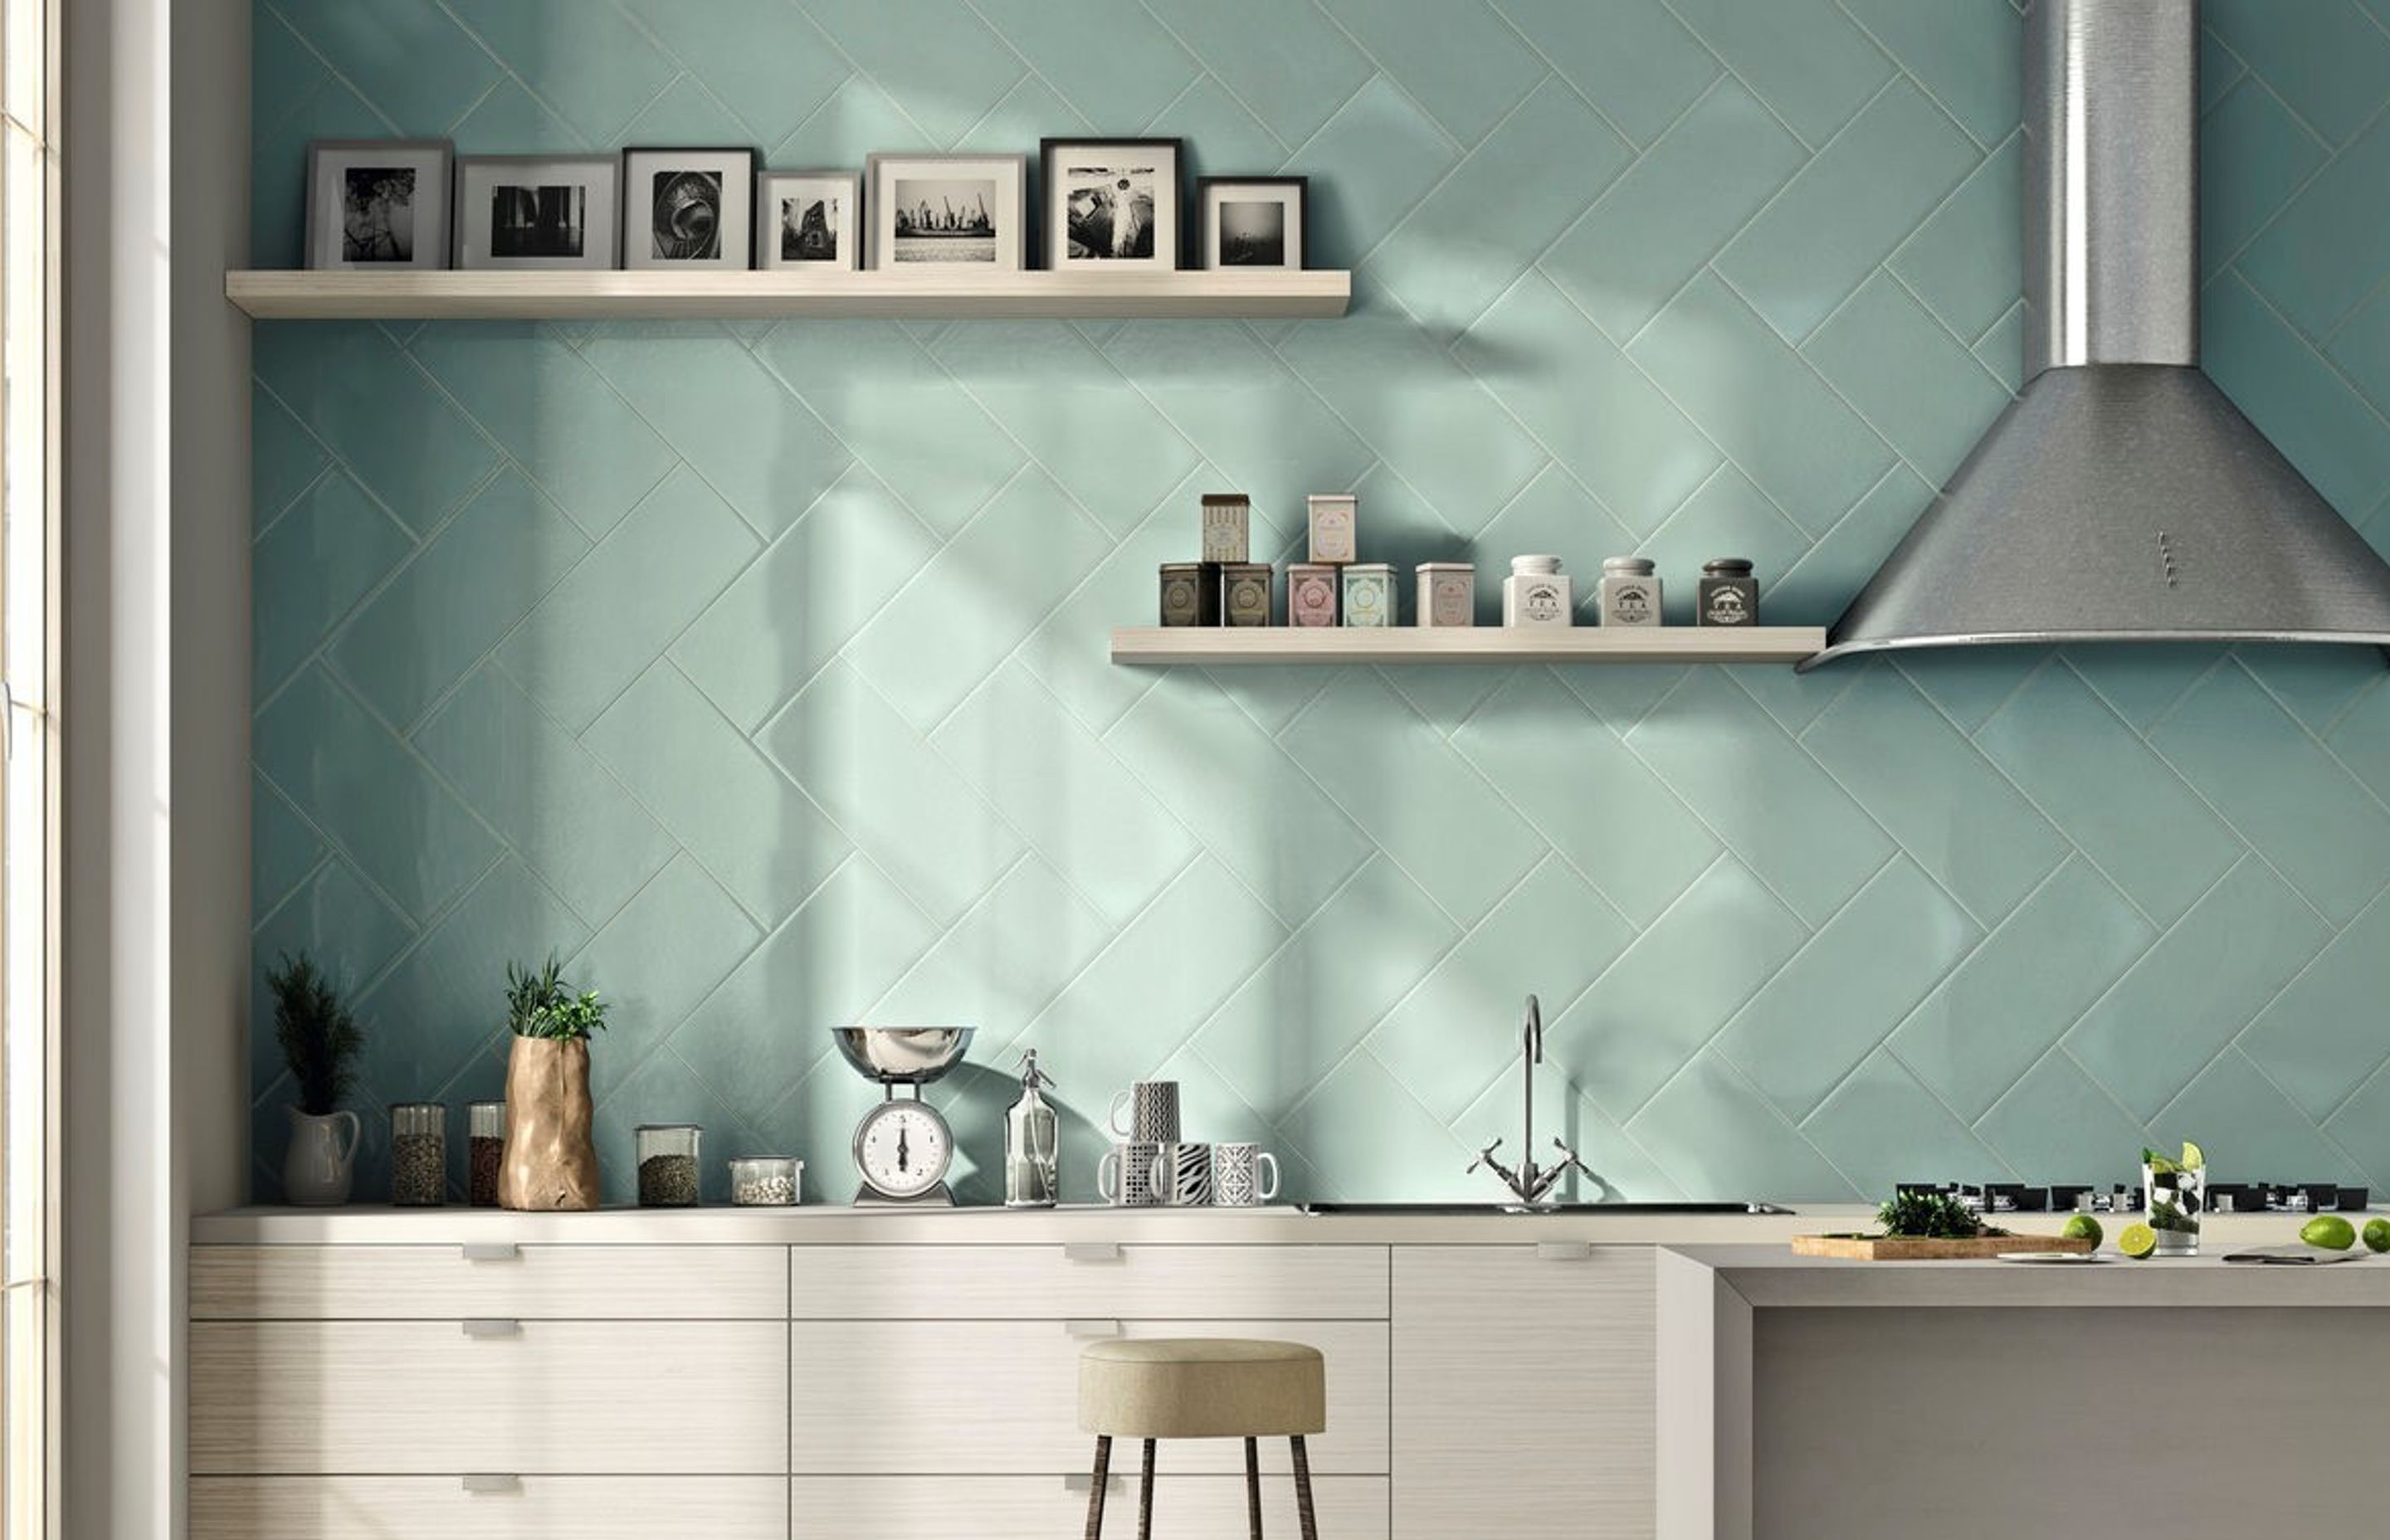 This splashback also acts as a feature wall with its cool aqua colour and brings a sort of serenity to the space when coupled with off white cabinet fronts. These glazed tiles have a smooth surface which are easy to clean. (Calx Aquamarina 100×300 tiles f